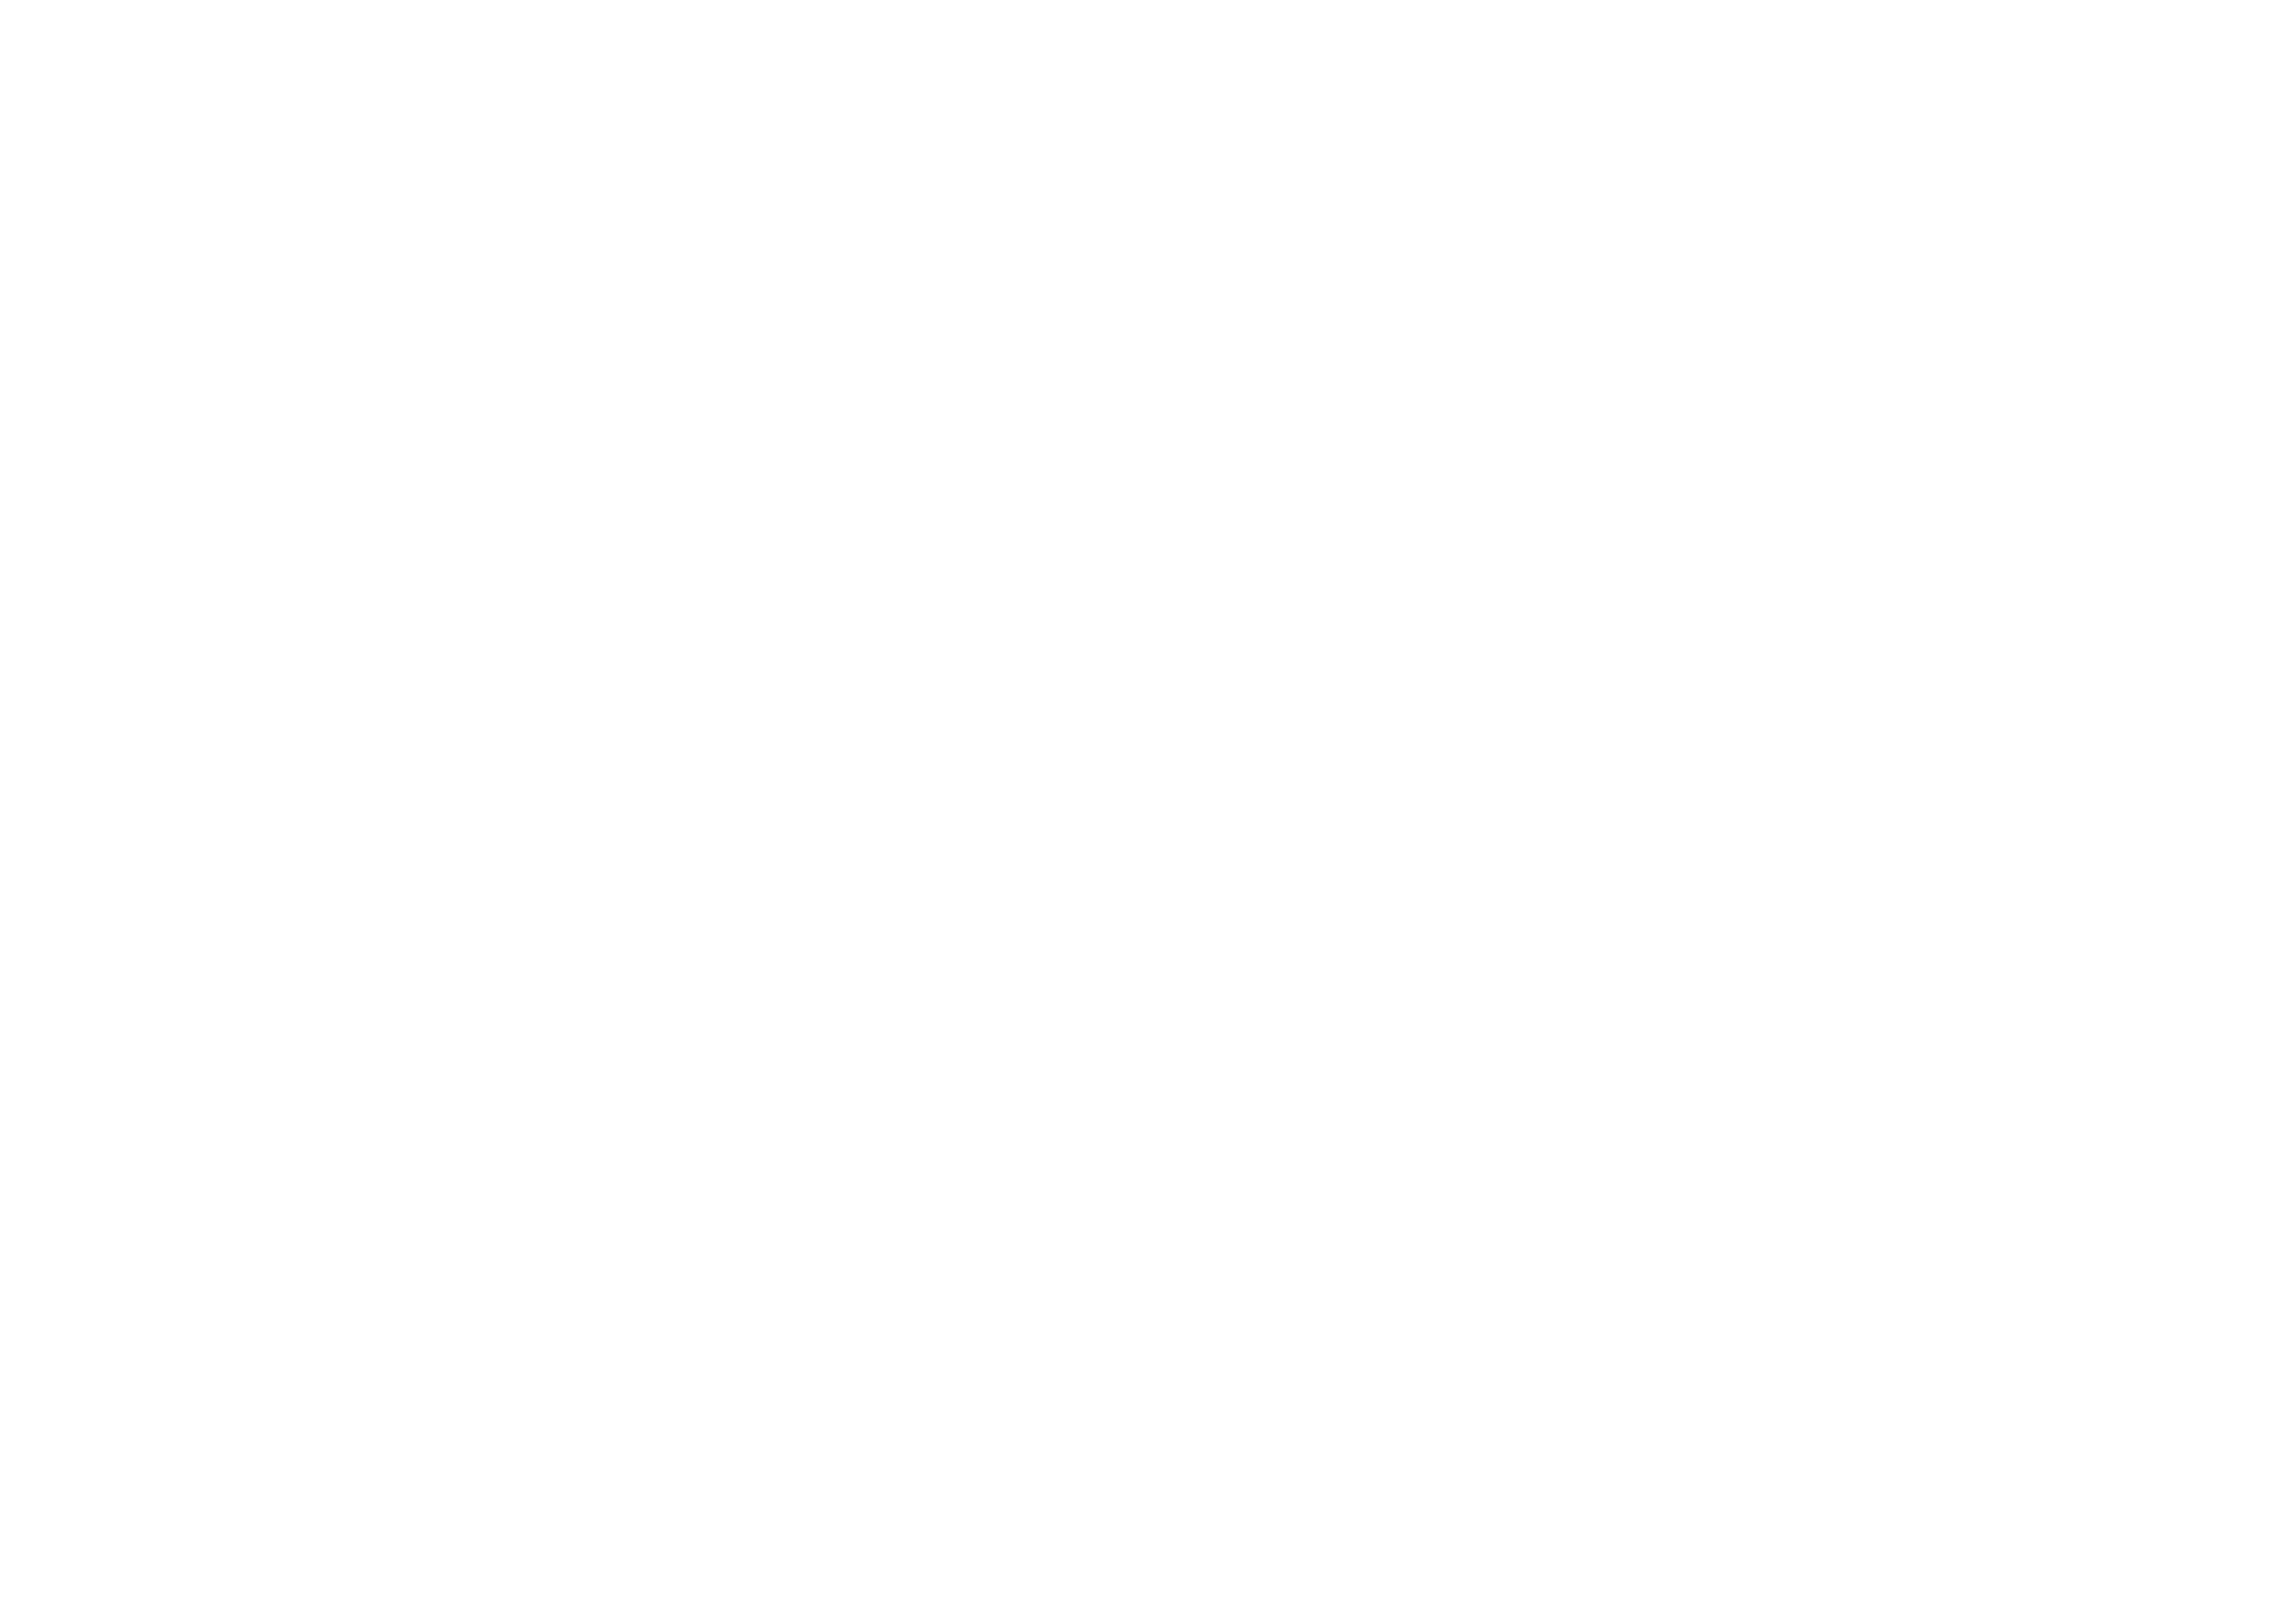 Soma Solutions